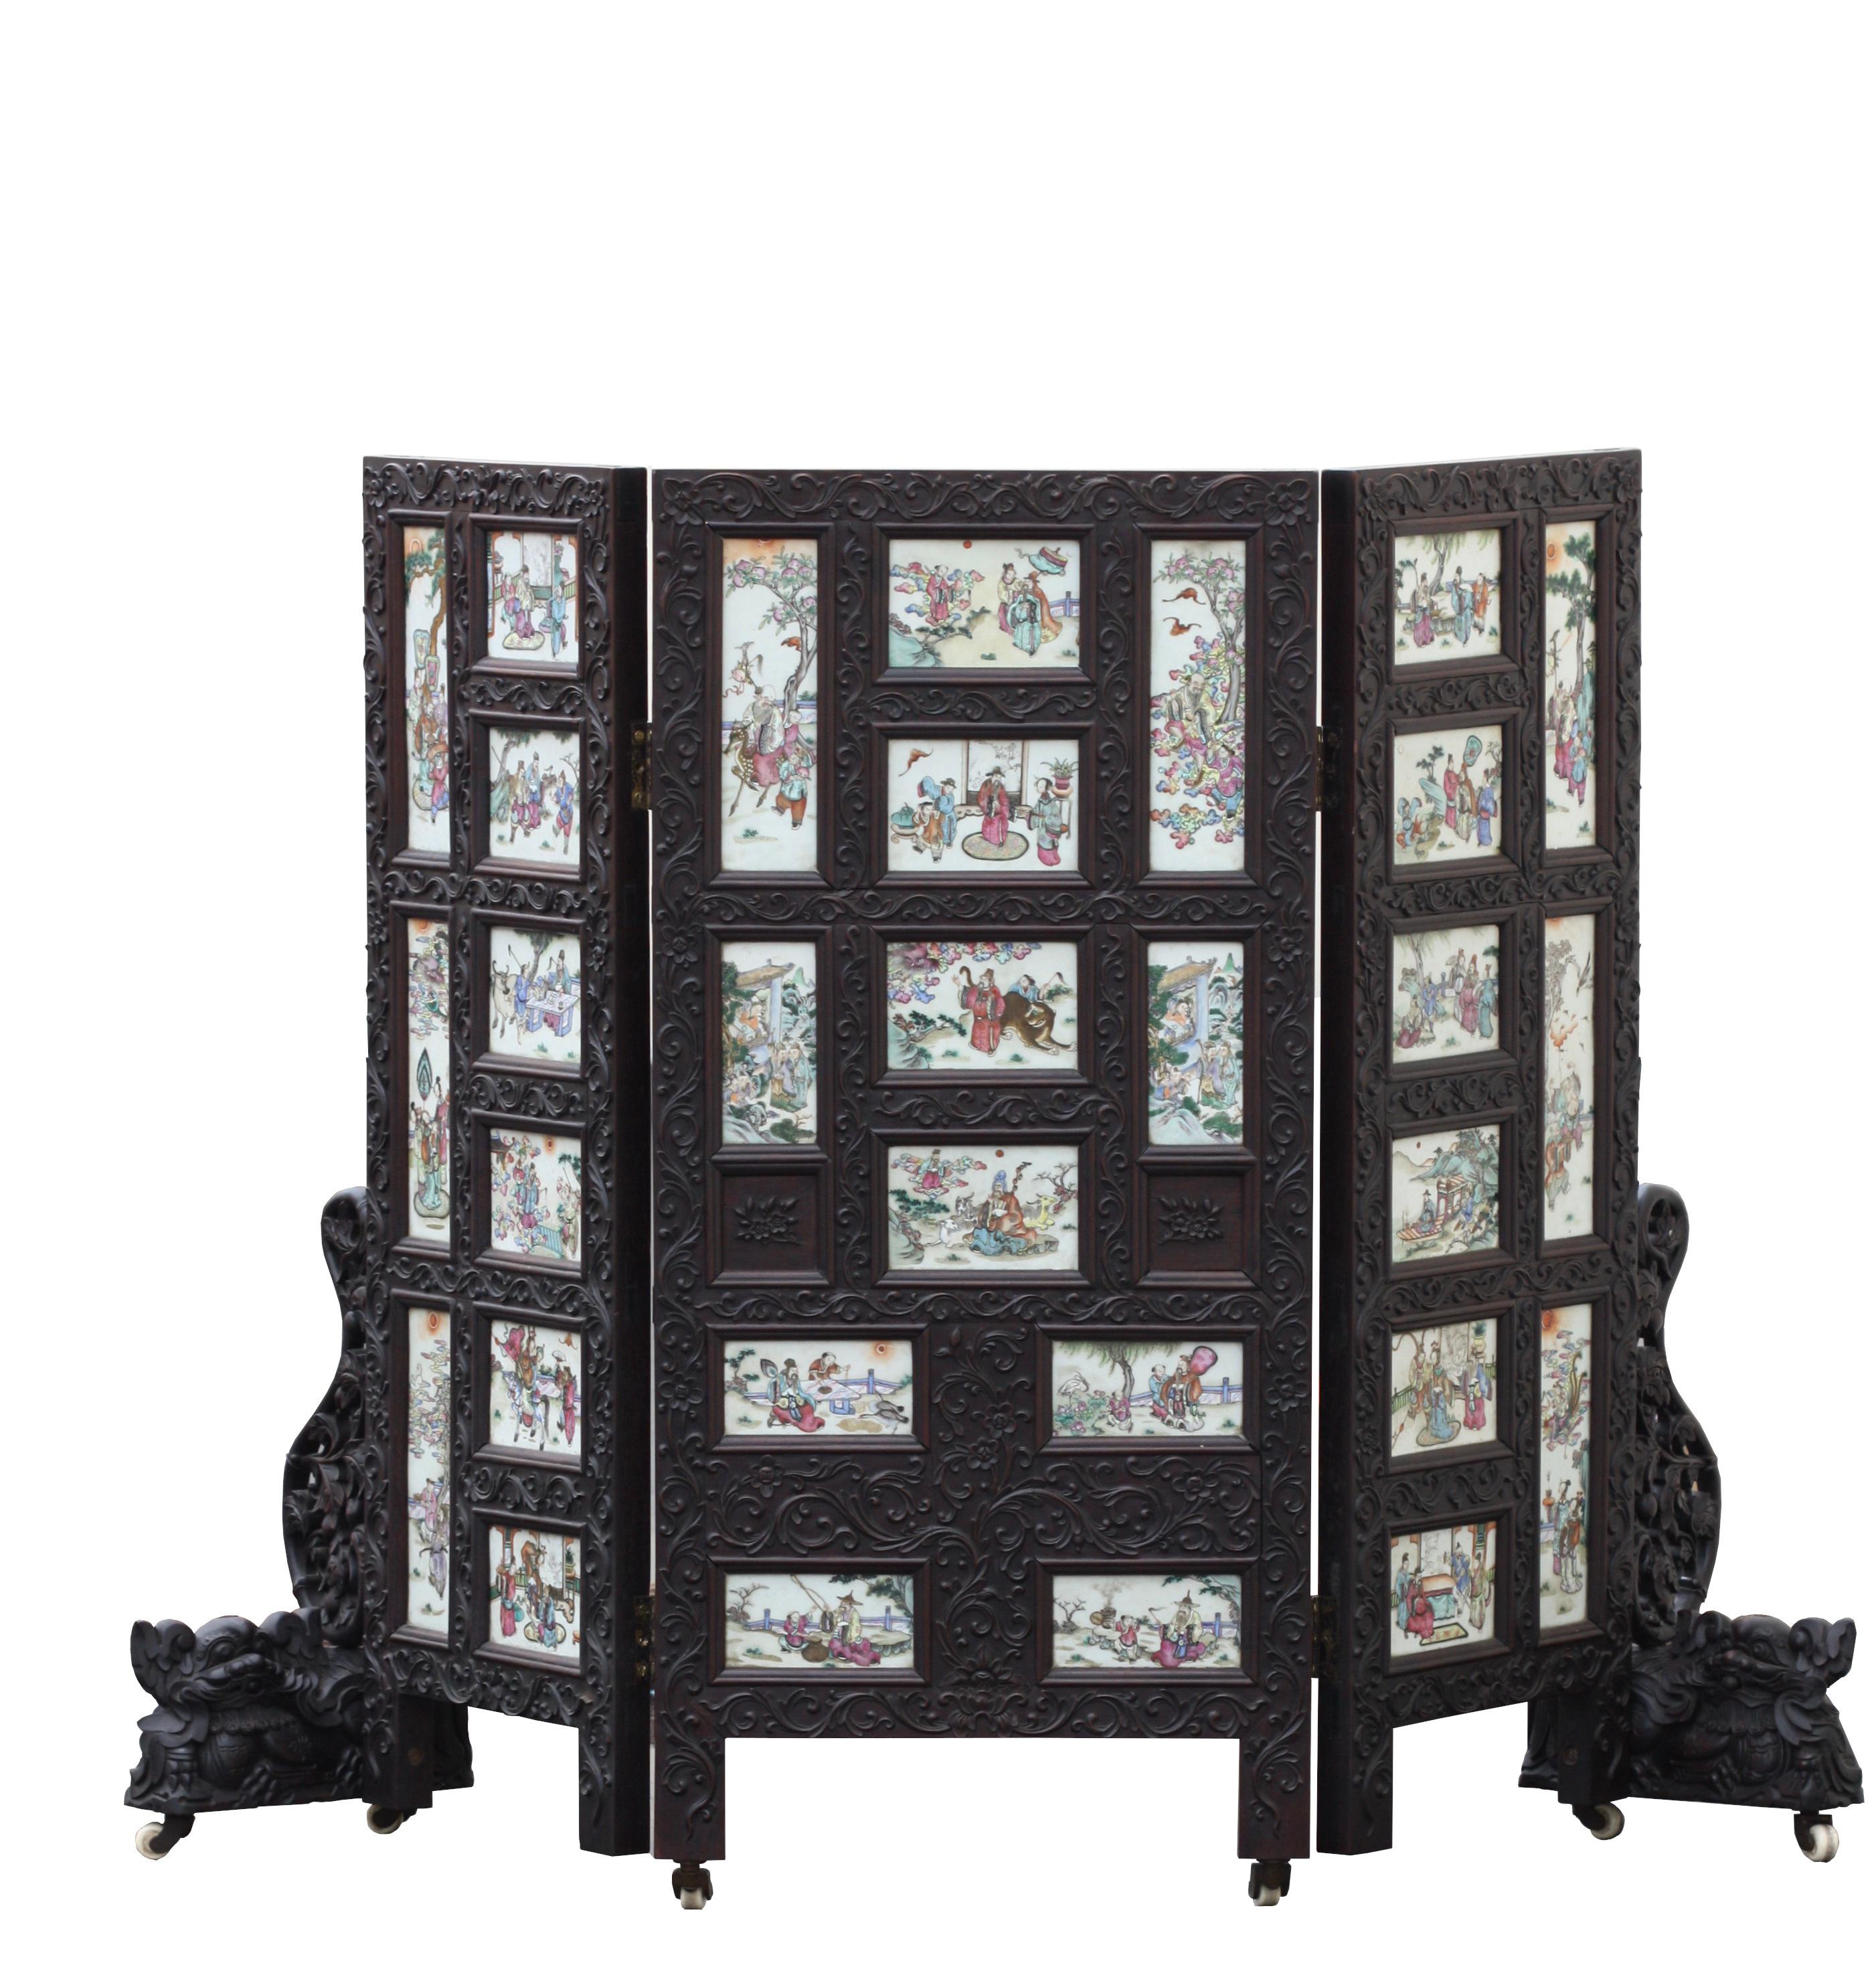 A Chinese three-panel porcelain inlaid and mixed wood screen
The frame mounted with thirty famille-rose panels painted with various figures, animals and auspicious objects
Measures: Height 41.25 in. x width 58 in.
(104.7 x 147 cm.)
  